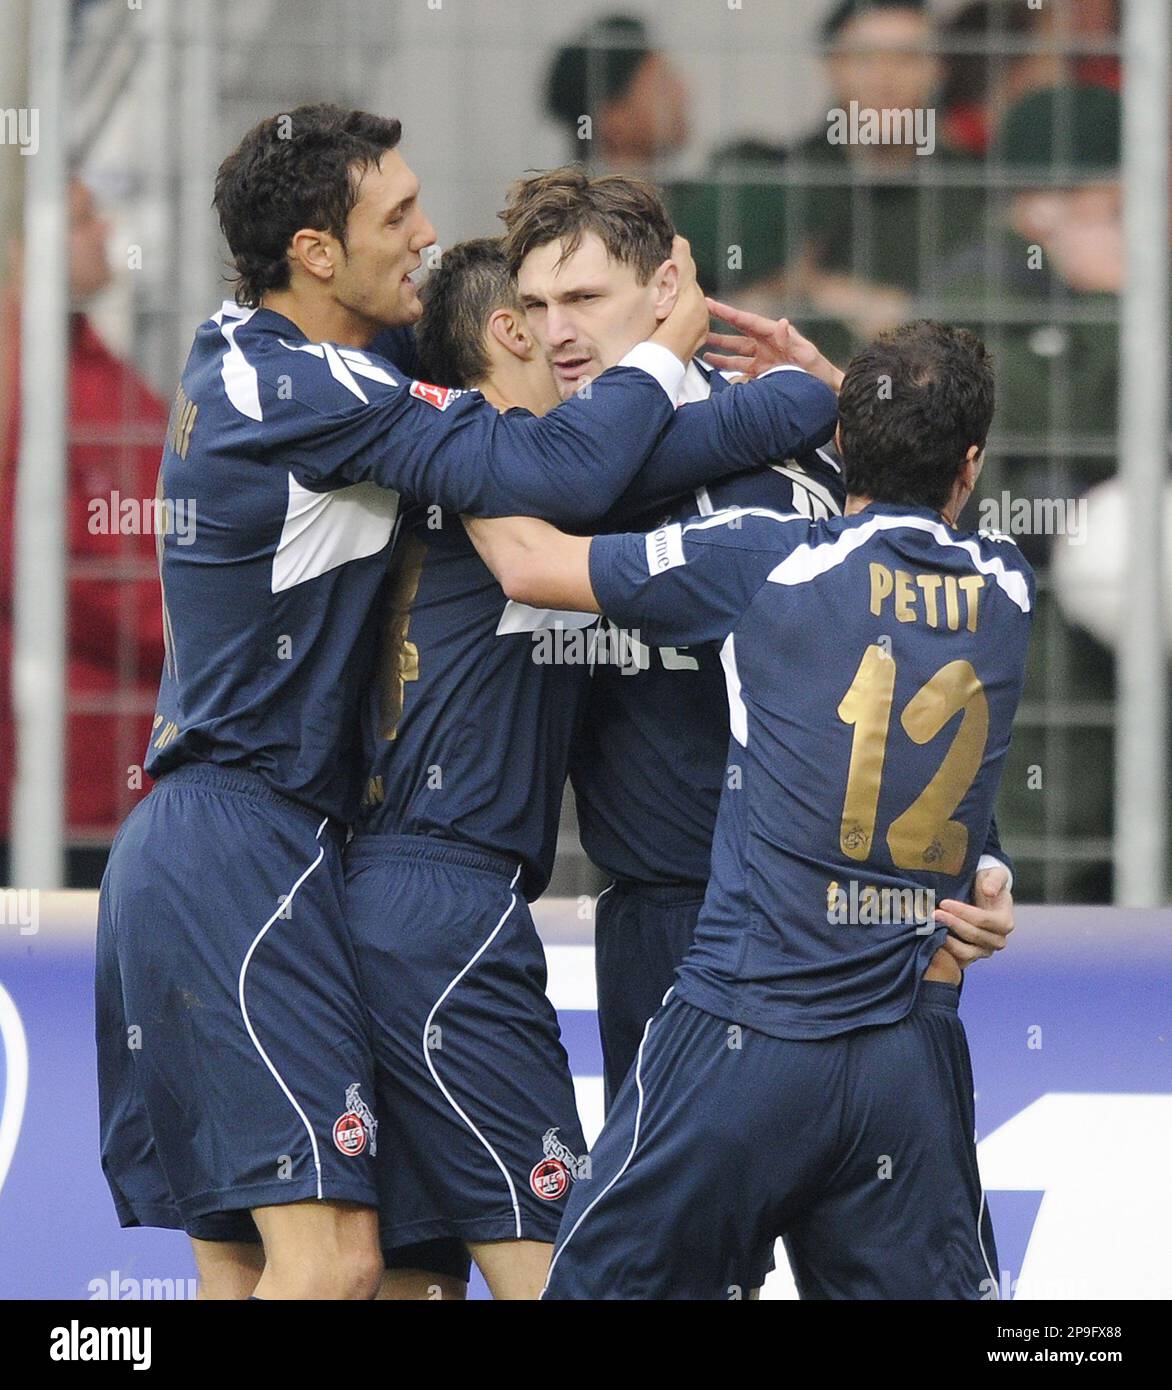 Cologne's Kevin Pezzoni, Sergiu Radu, Milivoje Novakovic and Petit, from left to right, celebrate the opening goal during the German first division Bundesliga soccer match between VfB Stuttgart and 1. FC Cologne in Stuttgart, Germany, on Saturday, Nov. 1, 2008. (AP Photo/Daniel Maurer)**eds note: German spelling of Cologne is Koeln** ** NO MOBILE USE UNTIL 2 HOURS AFTER THE MATCH, WEBSITE USERS ARE OBLIGED TO COMPLY WITH DFL-RESTRICTIONS, SEE INSTRUCTIONS FOR DETAILS ** Stock Photo